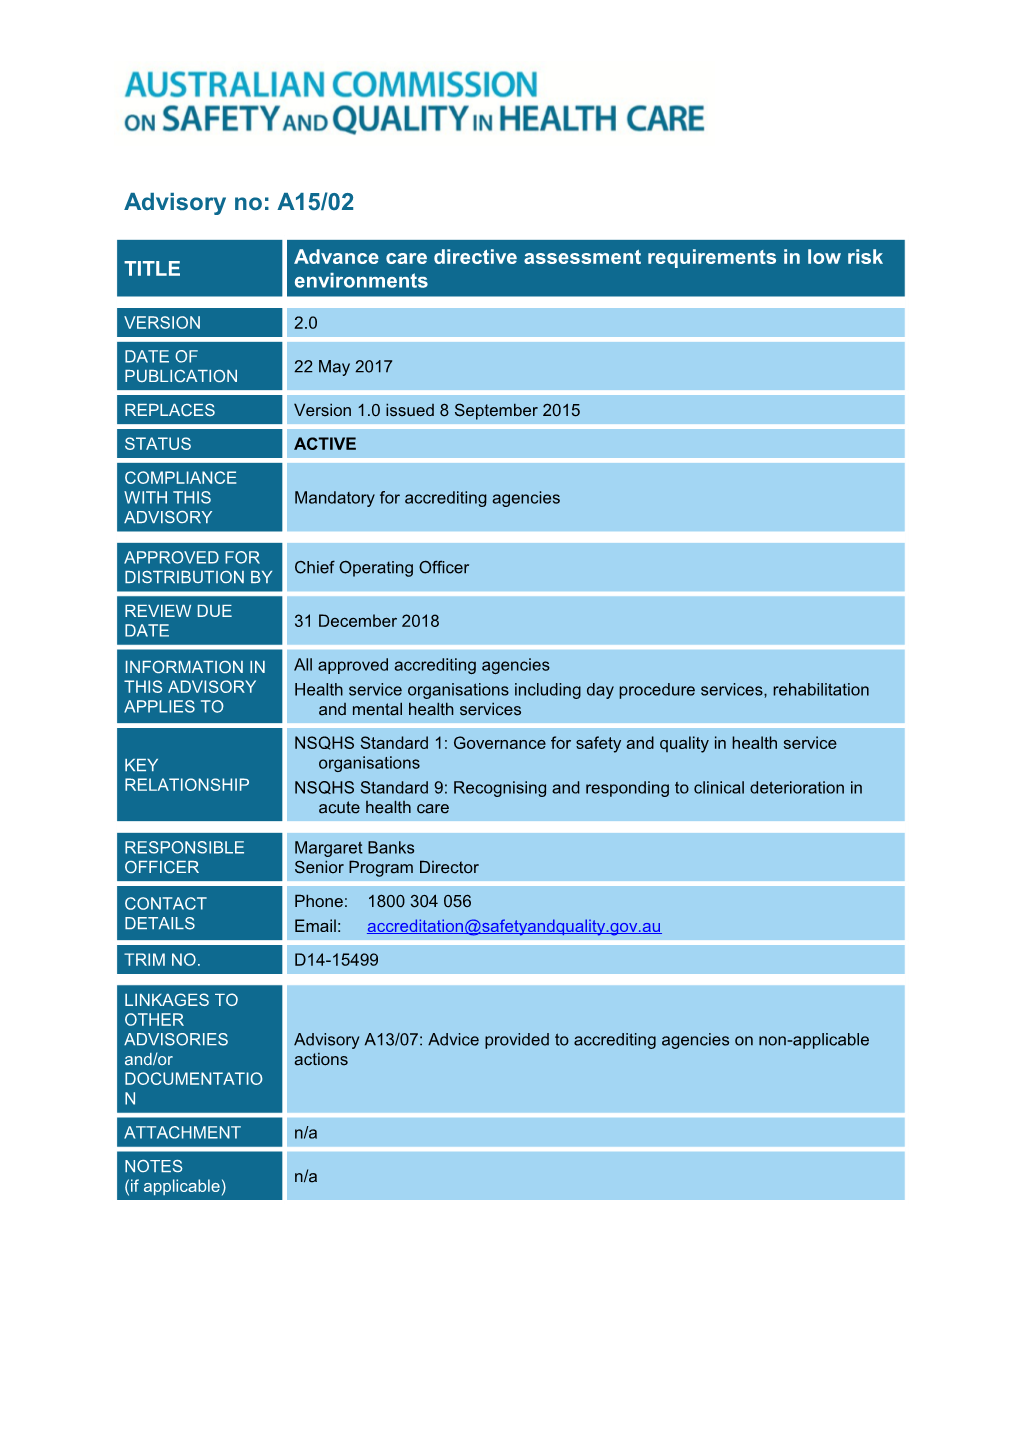 Advisory A15/02: Advance Care Directive Assessment Requirements in Low Risk Environments